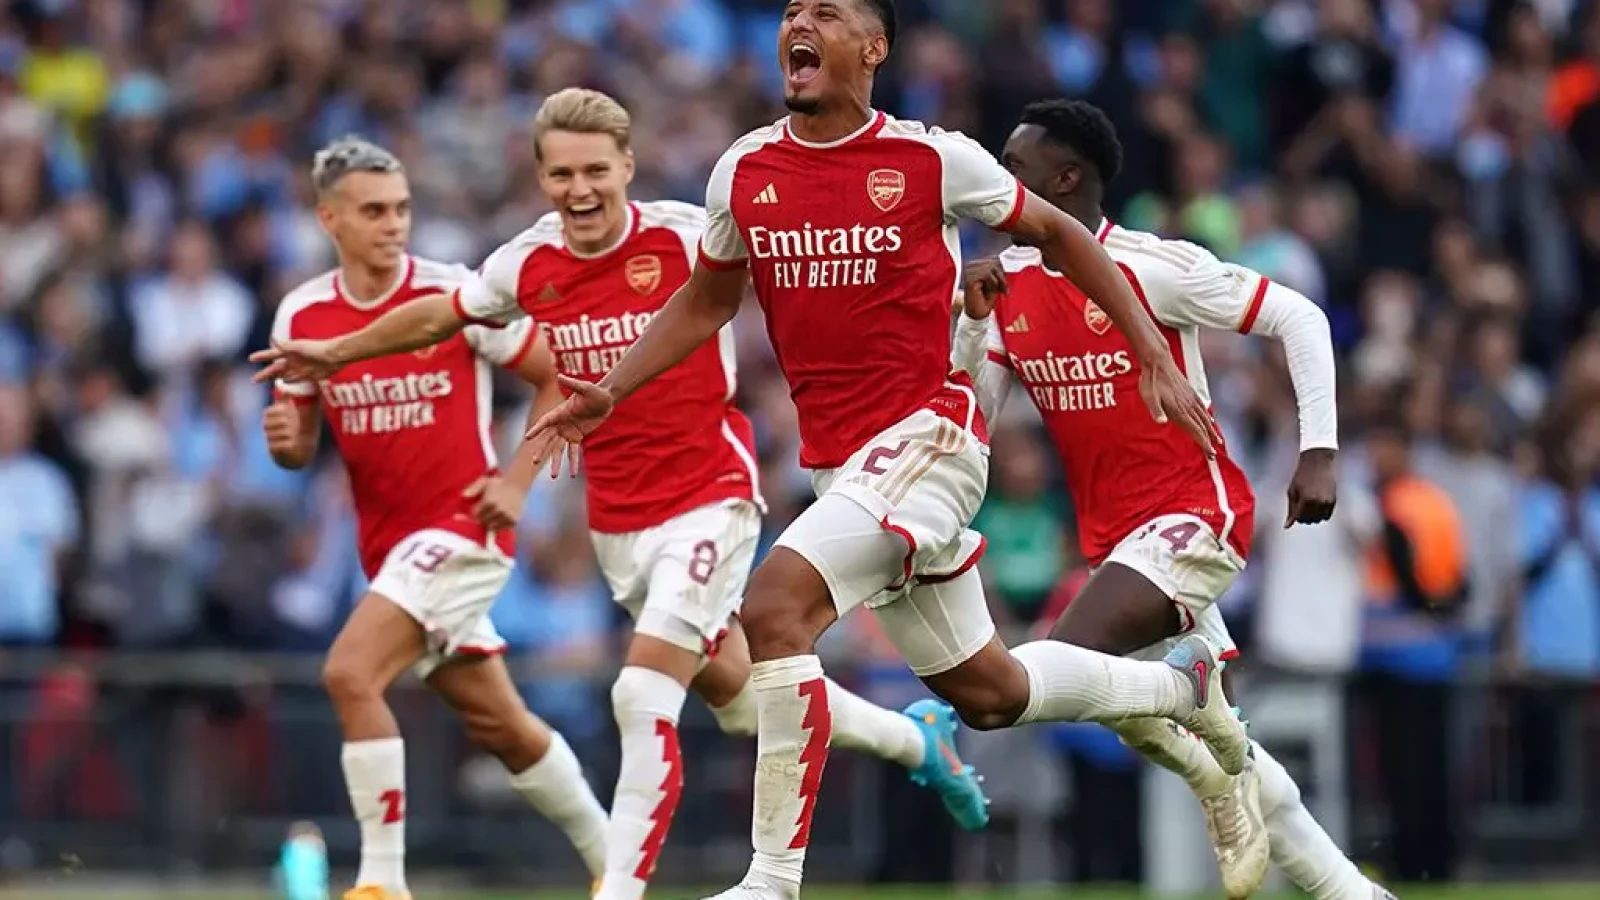 Arsenal lift Community Shield after penalty shootout win over